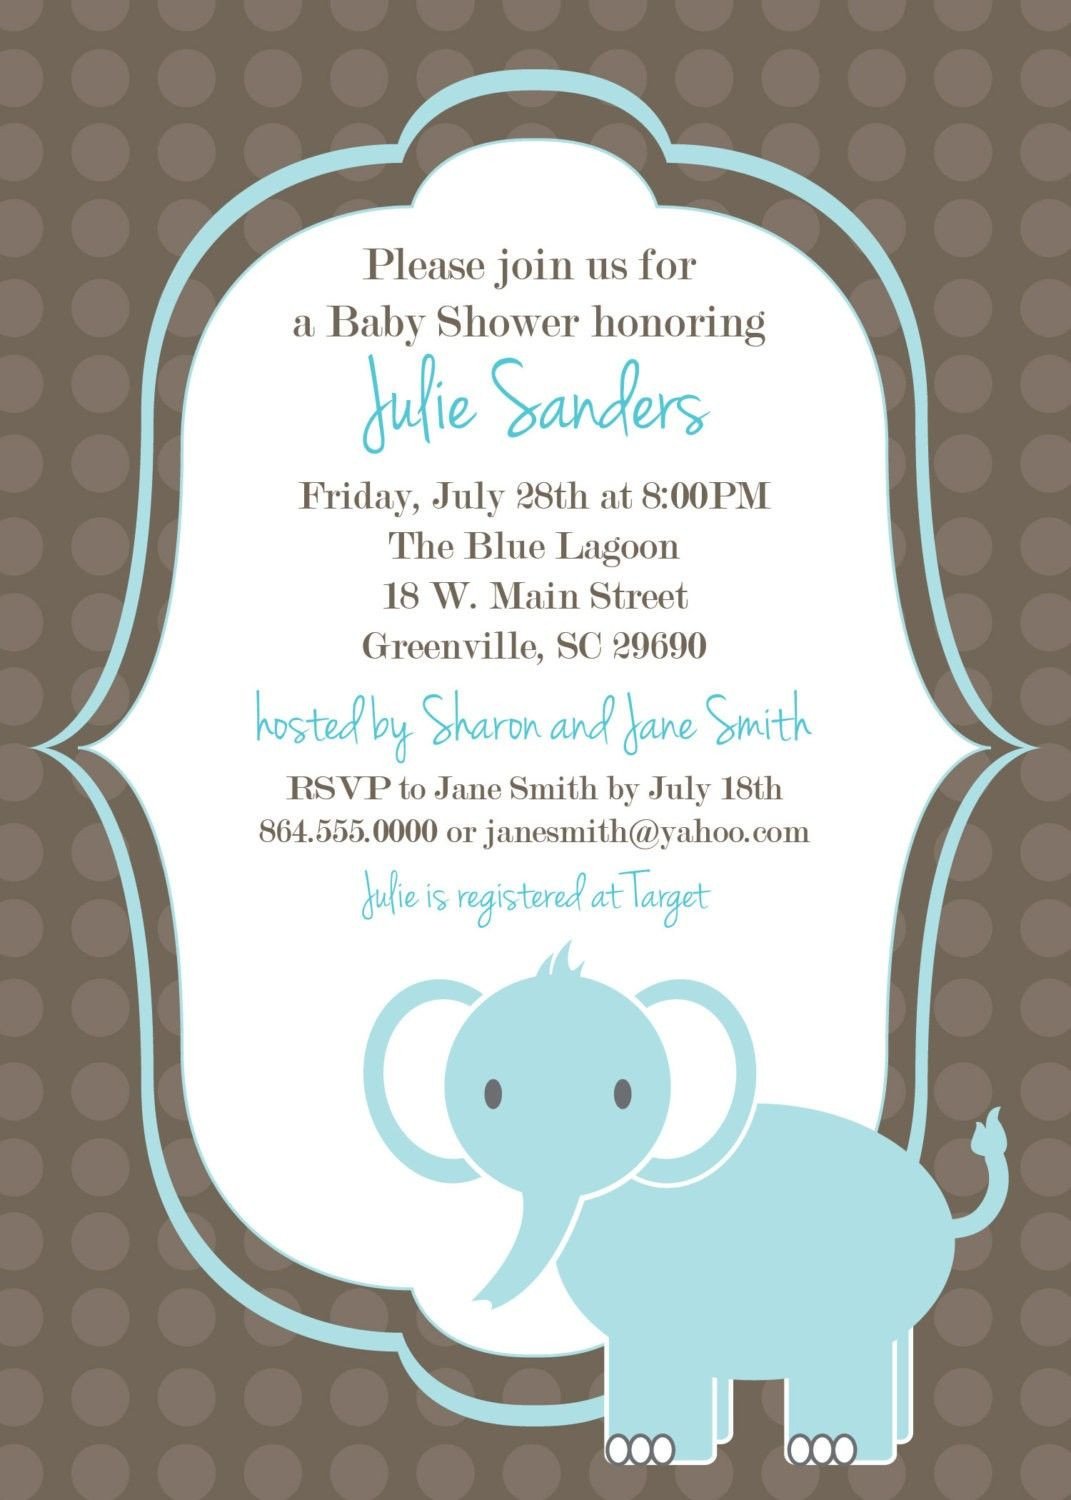 Baby Shower Invitation Free Template Download Free Template Got the Free Baby Shower